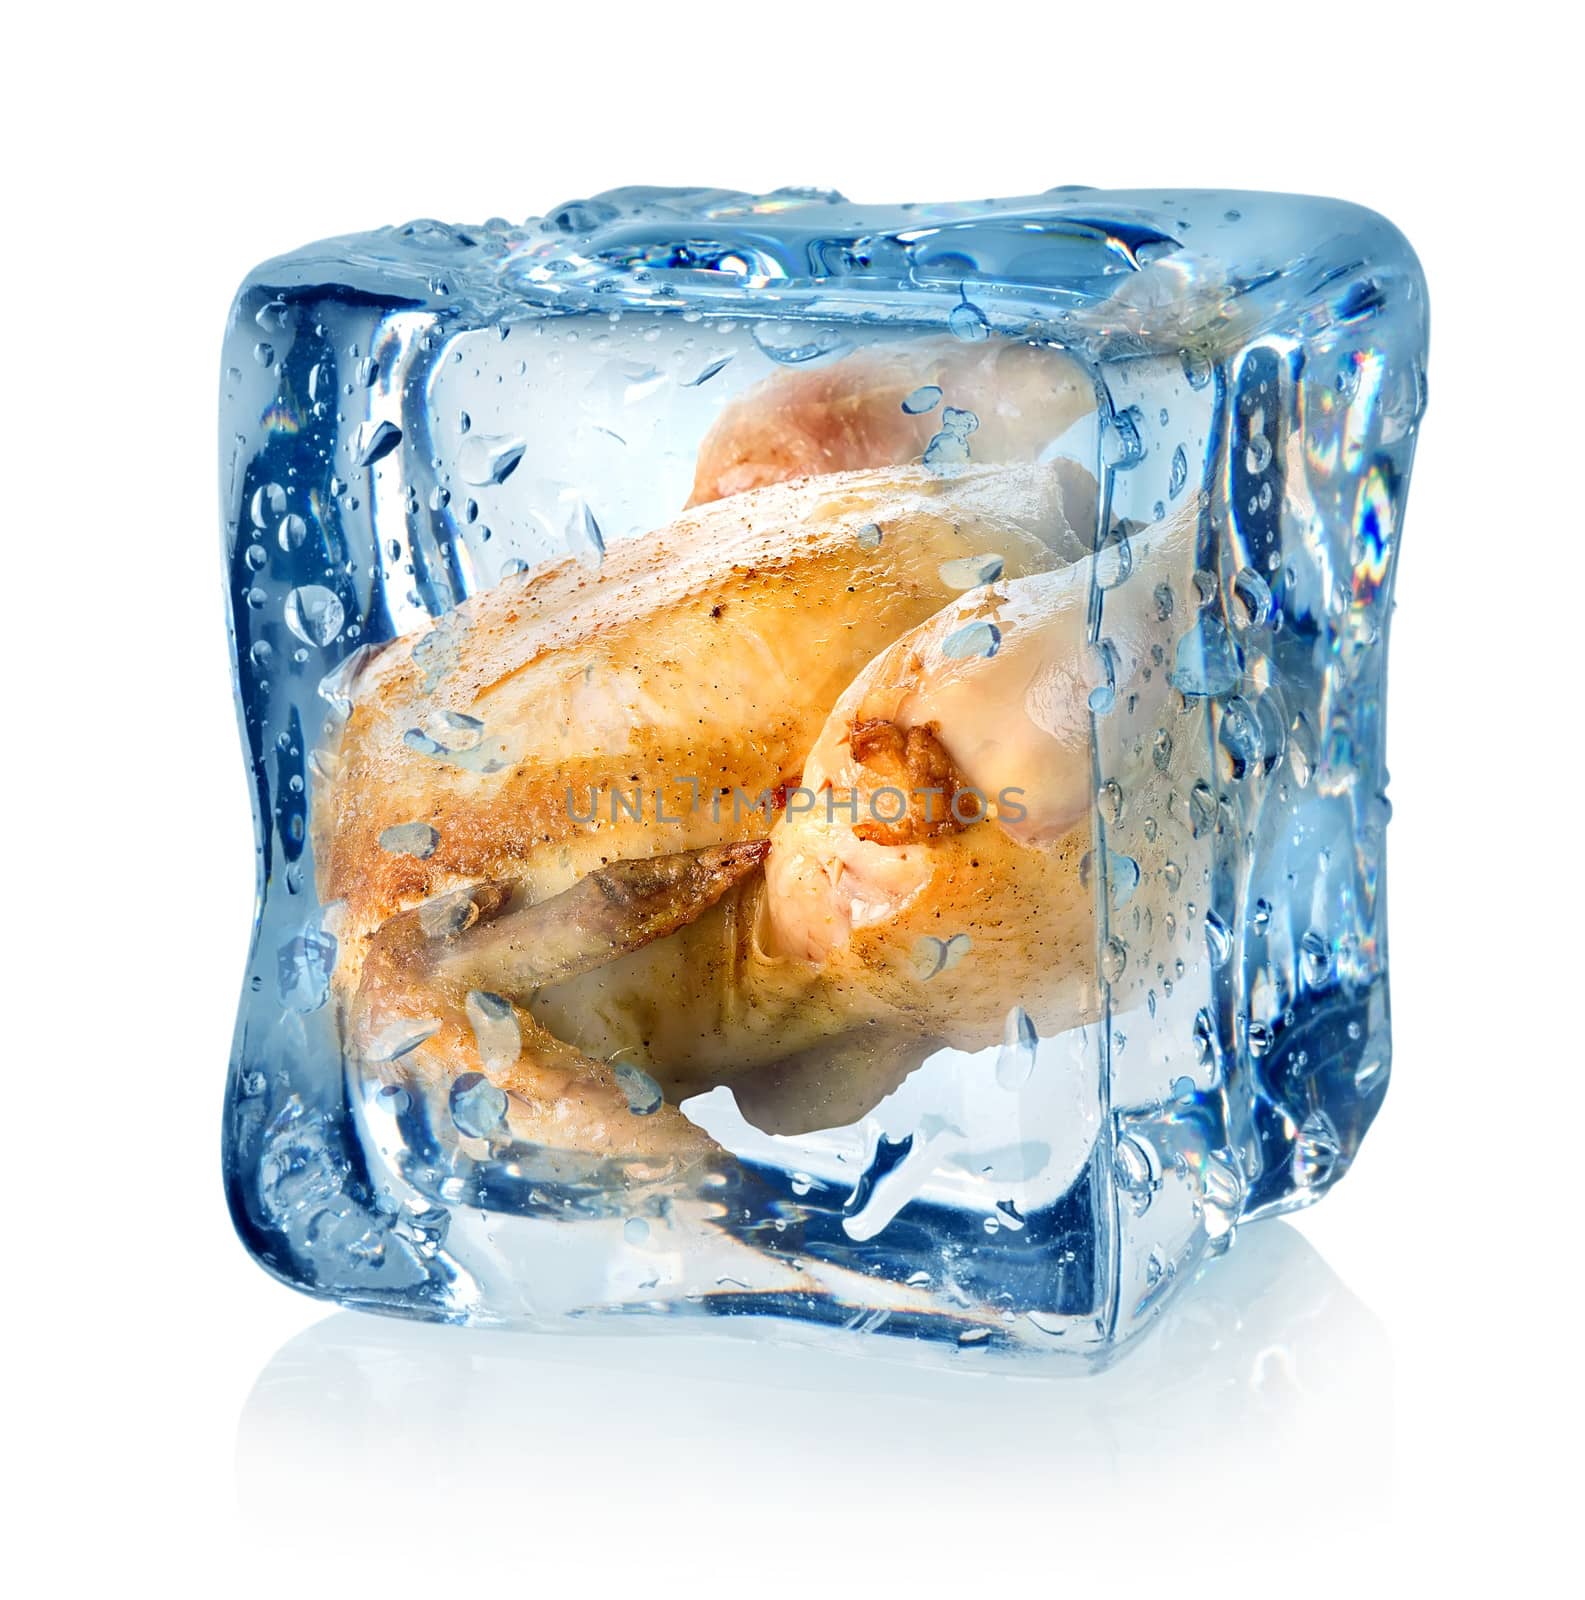 Roasted chicken in ice cube isolated on a white background